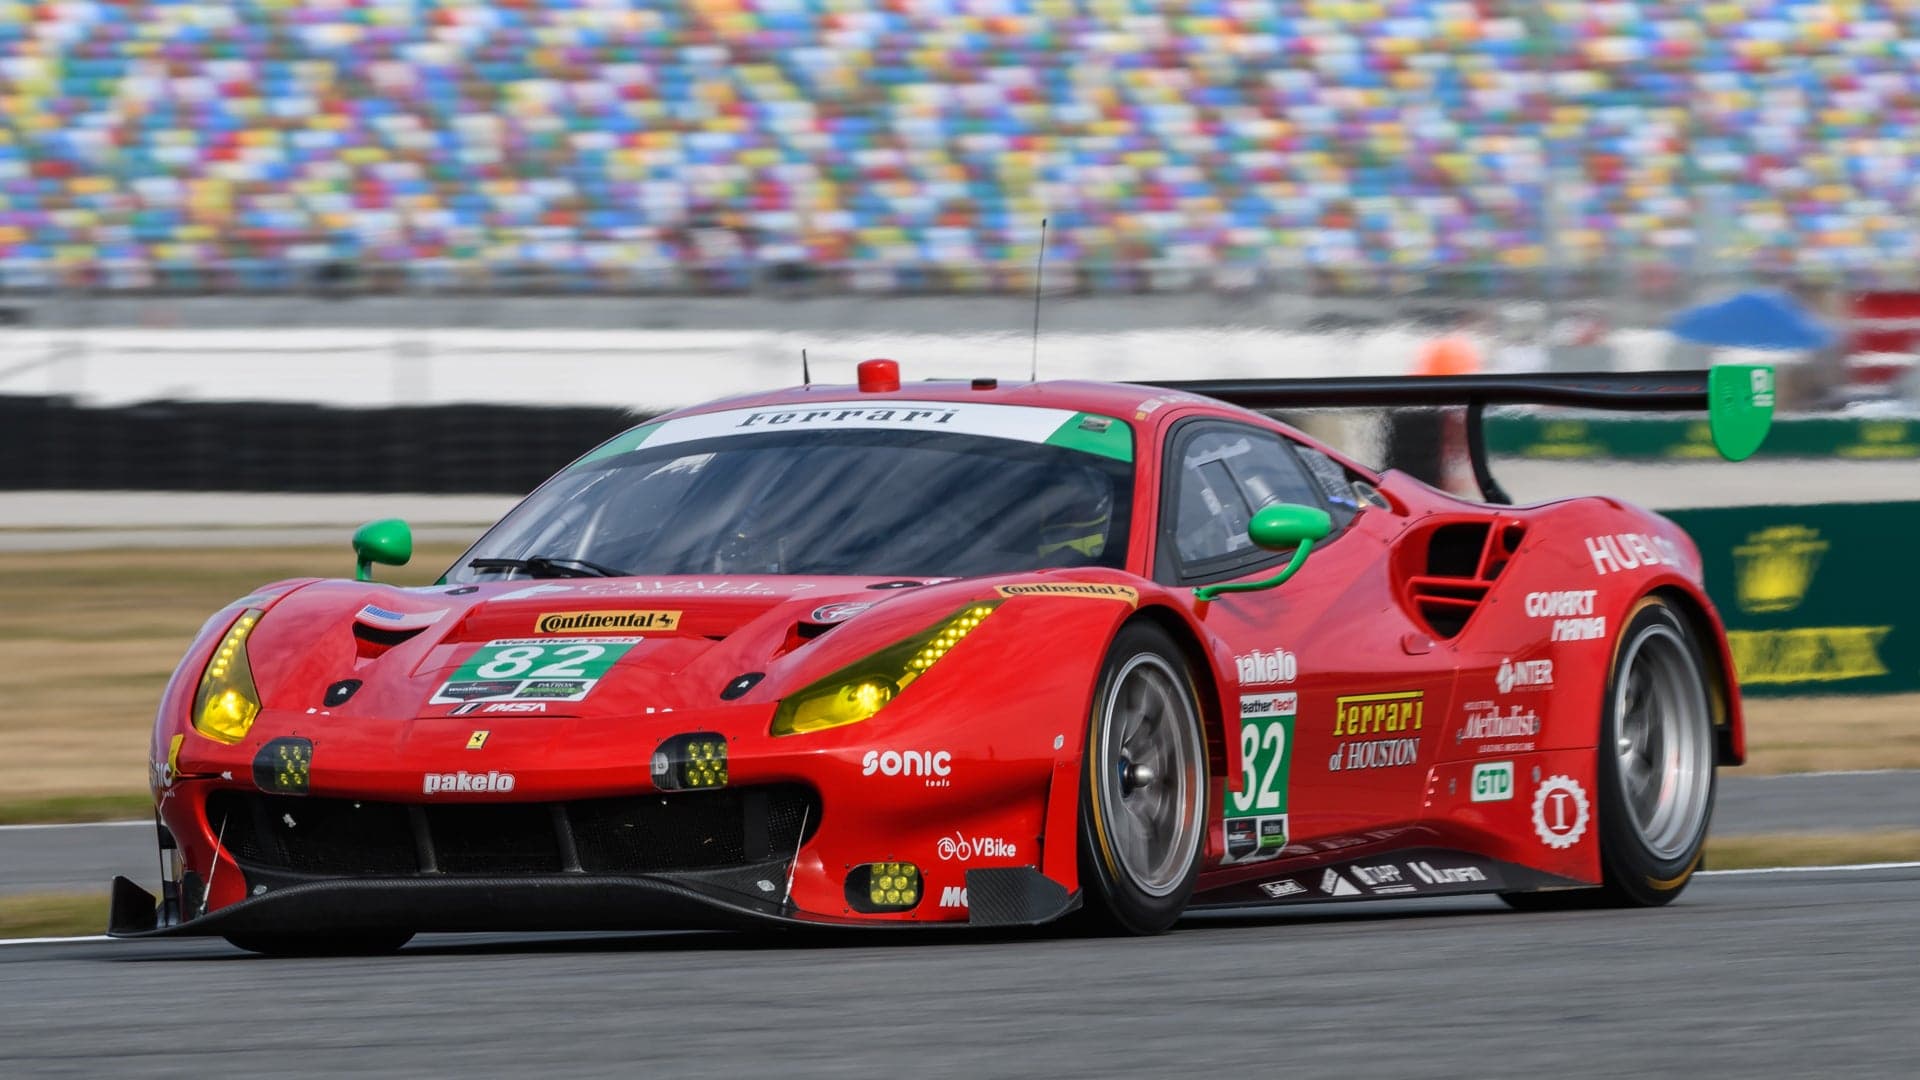 Keating Partnering with Risi Competizione for 2018 24 Hours of Le Mans Bid